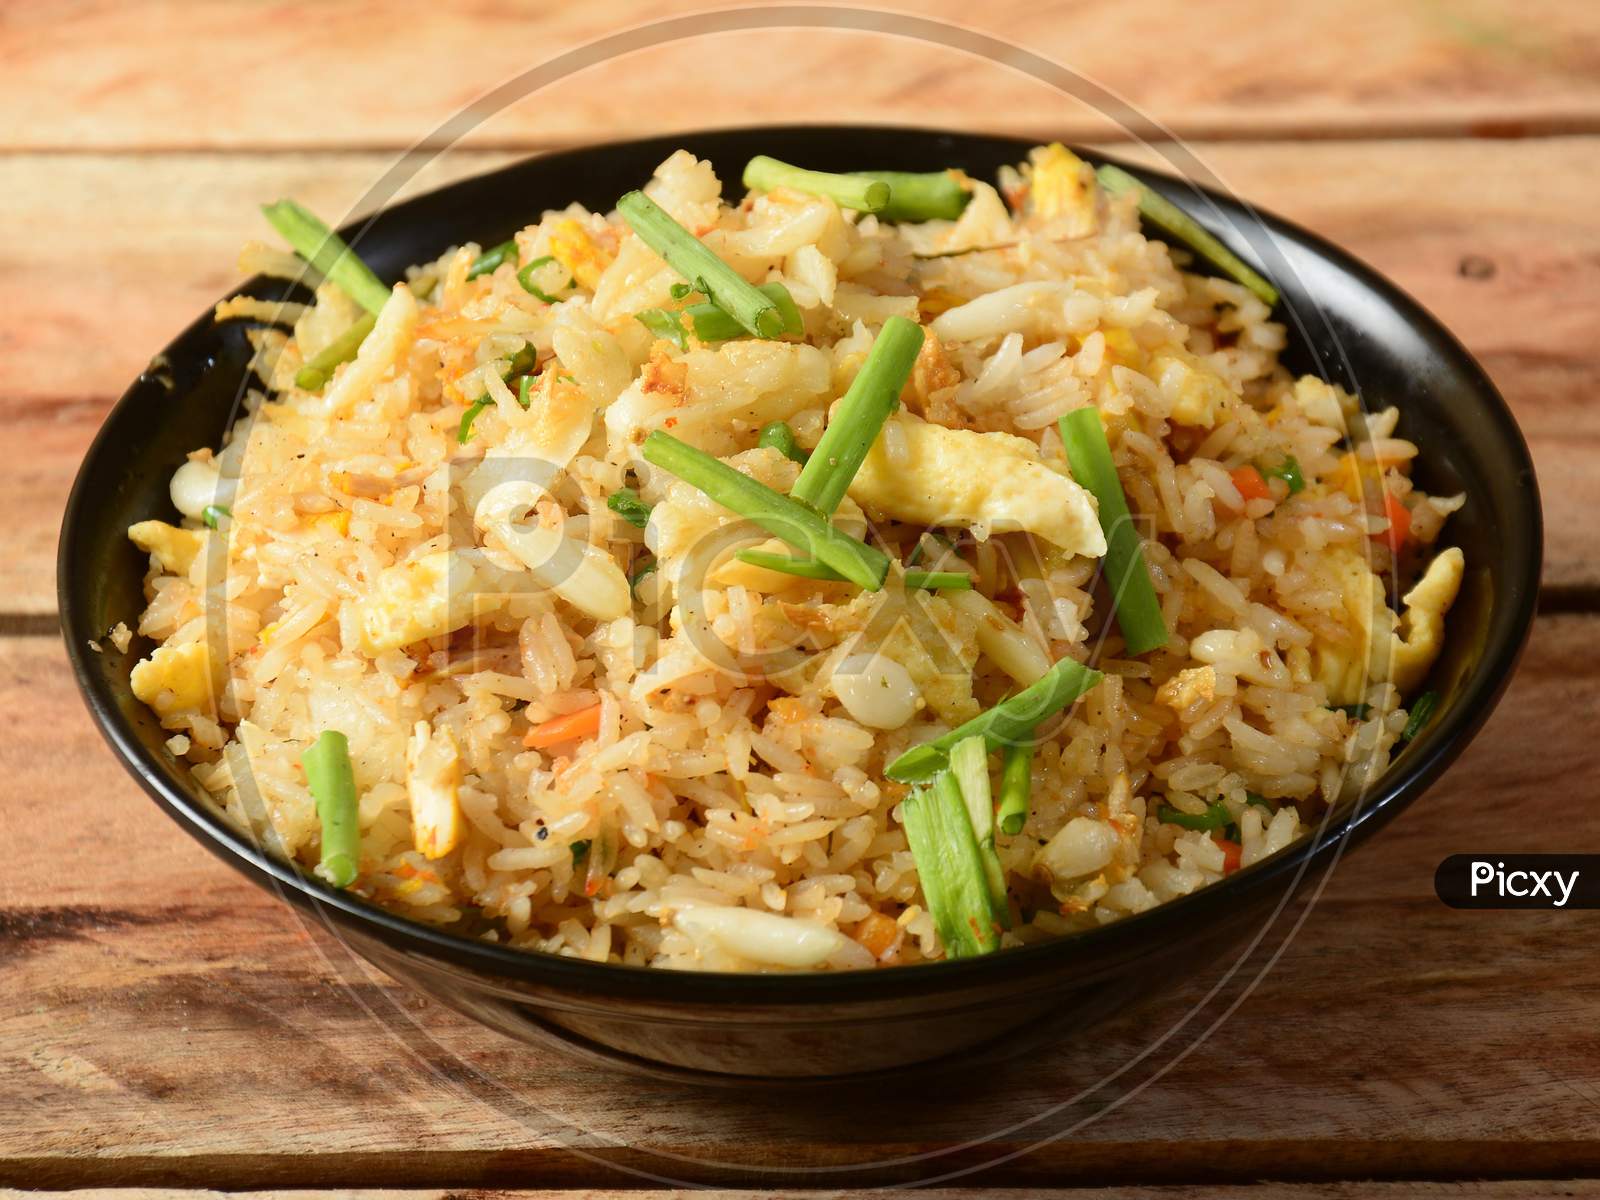 Indian Cuisine Healthy And Tasty Brunt Garlic Chicken Fried Rice Served In Black Bowl Over A Rustic Wooden Background, Selective Focus